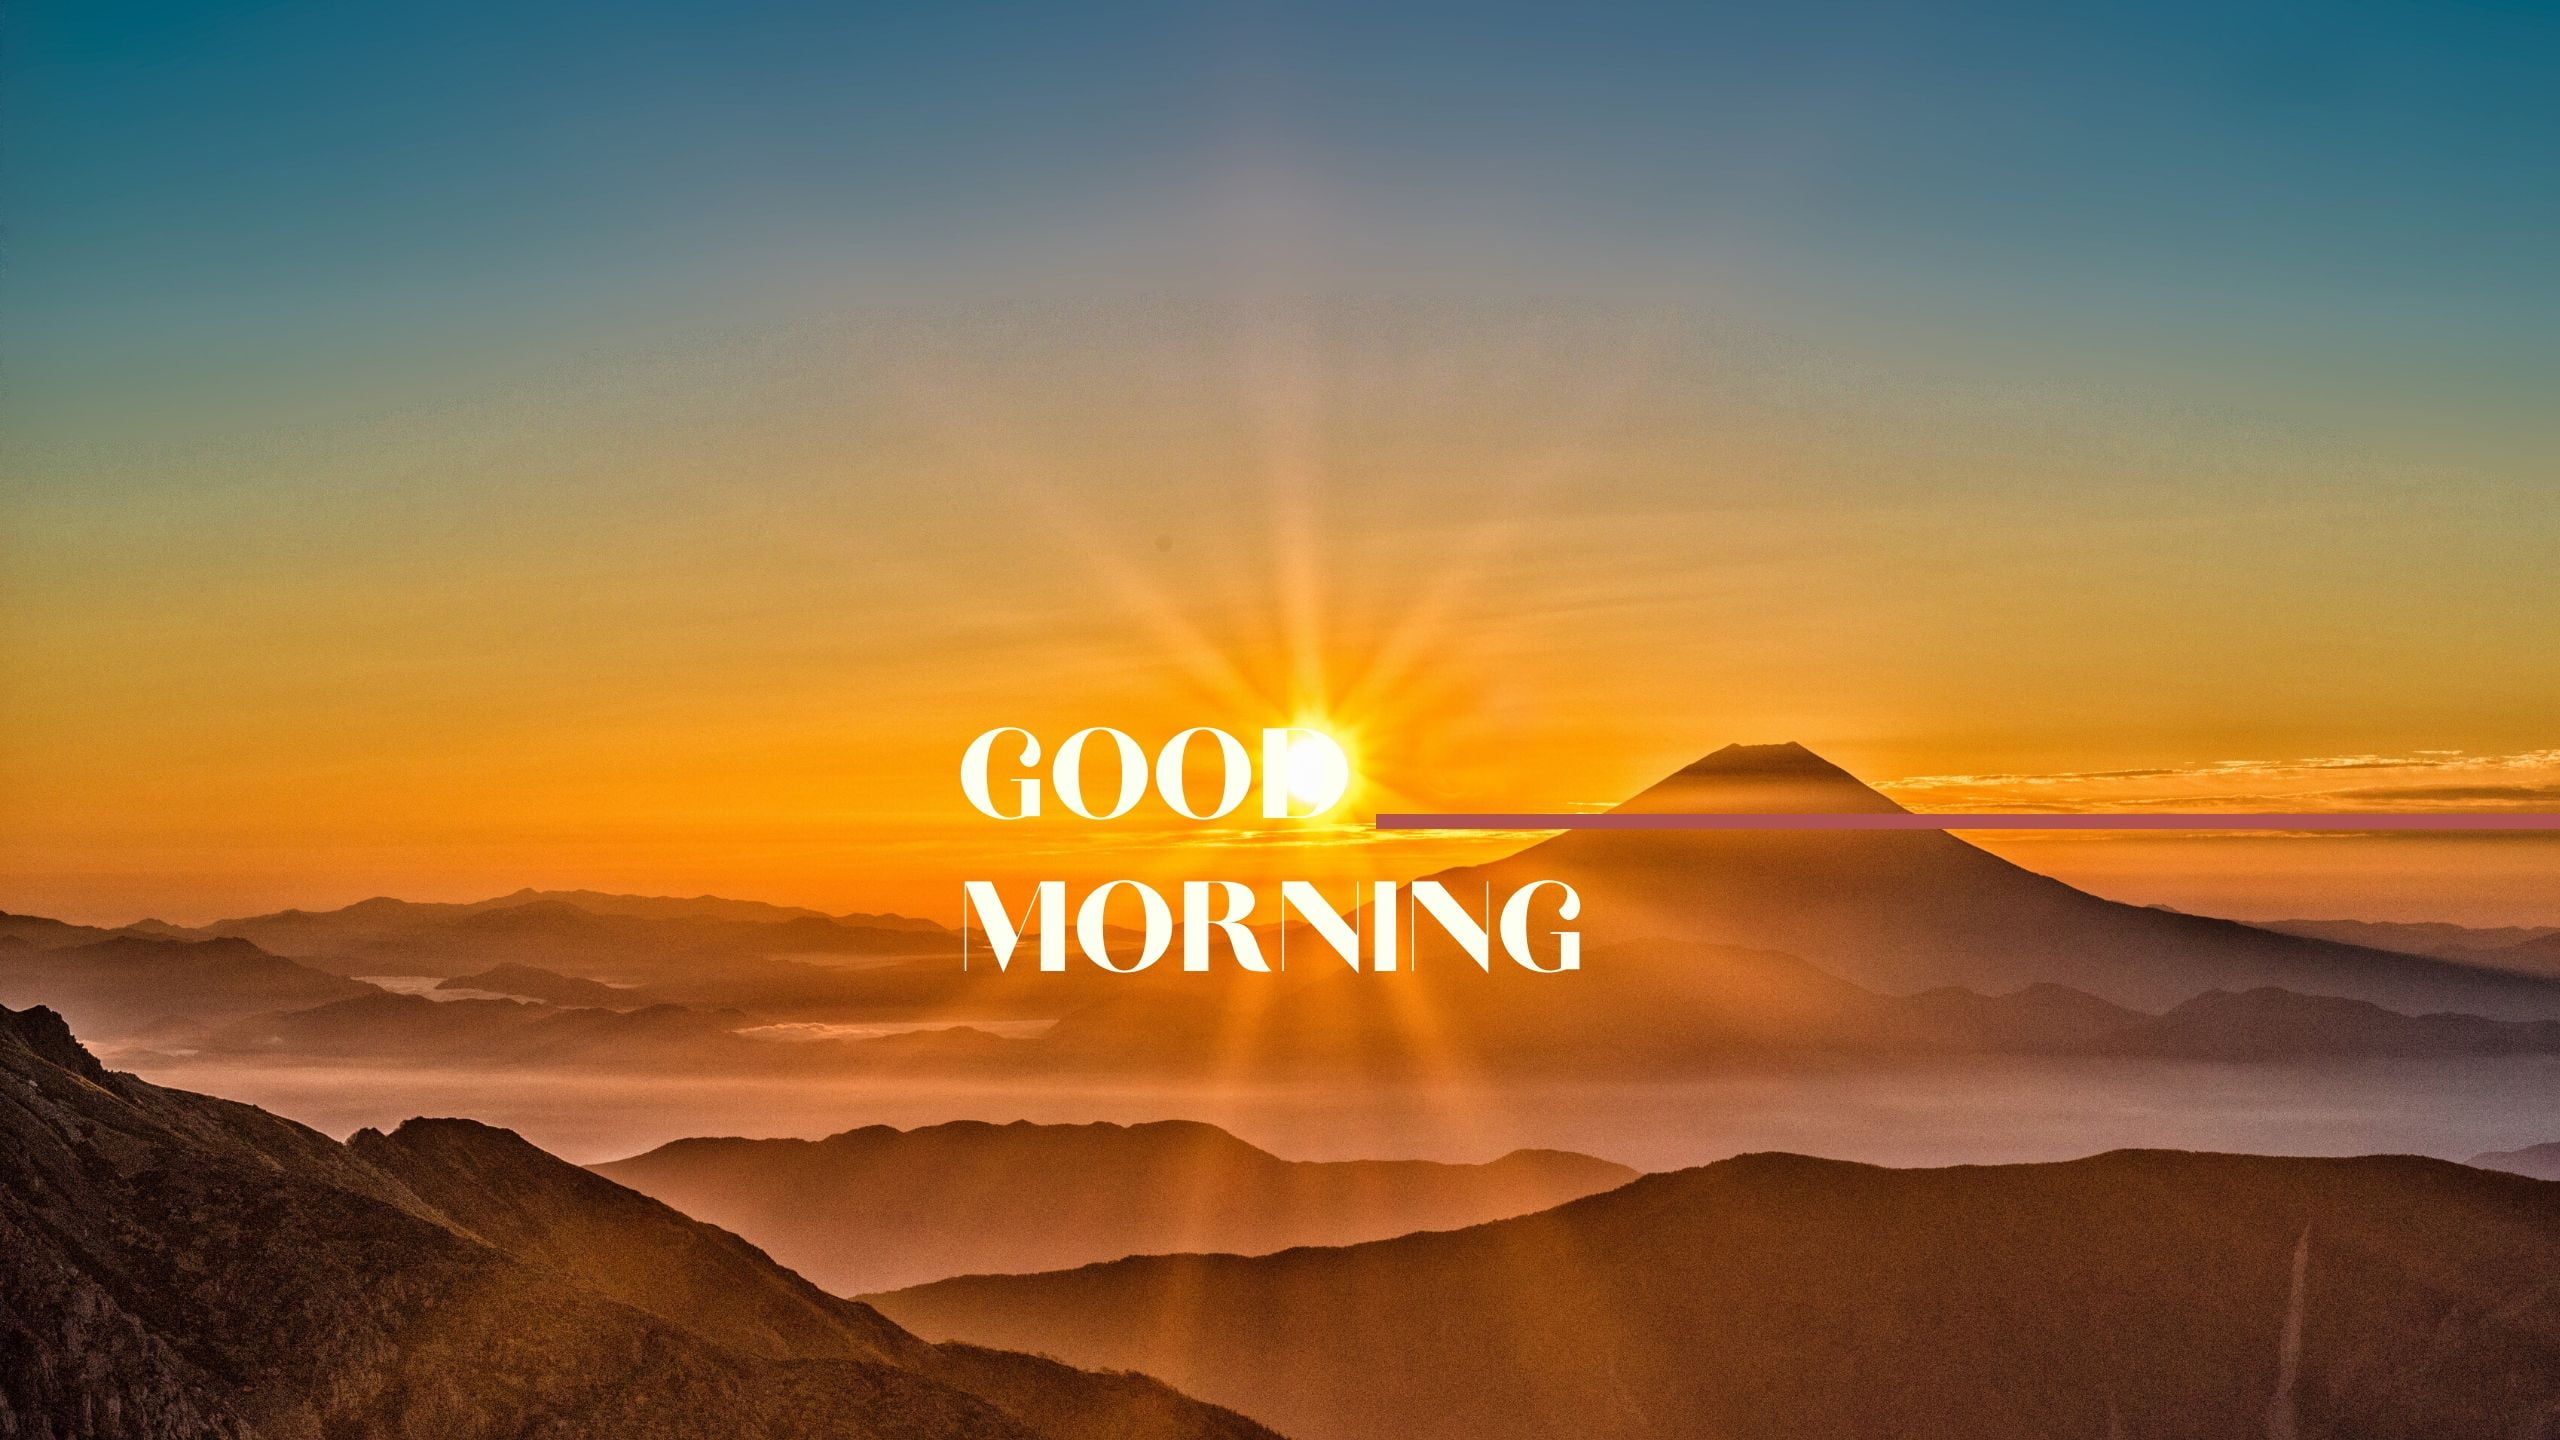 Sun Rising over the Mountain Good Morning Image full HD free download.